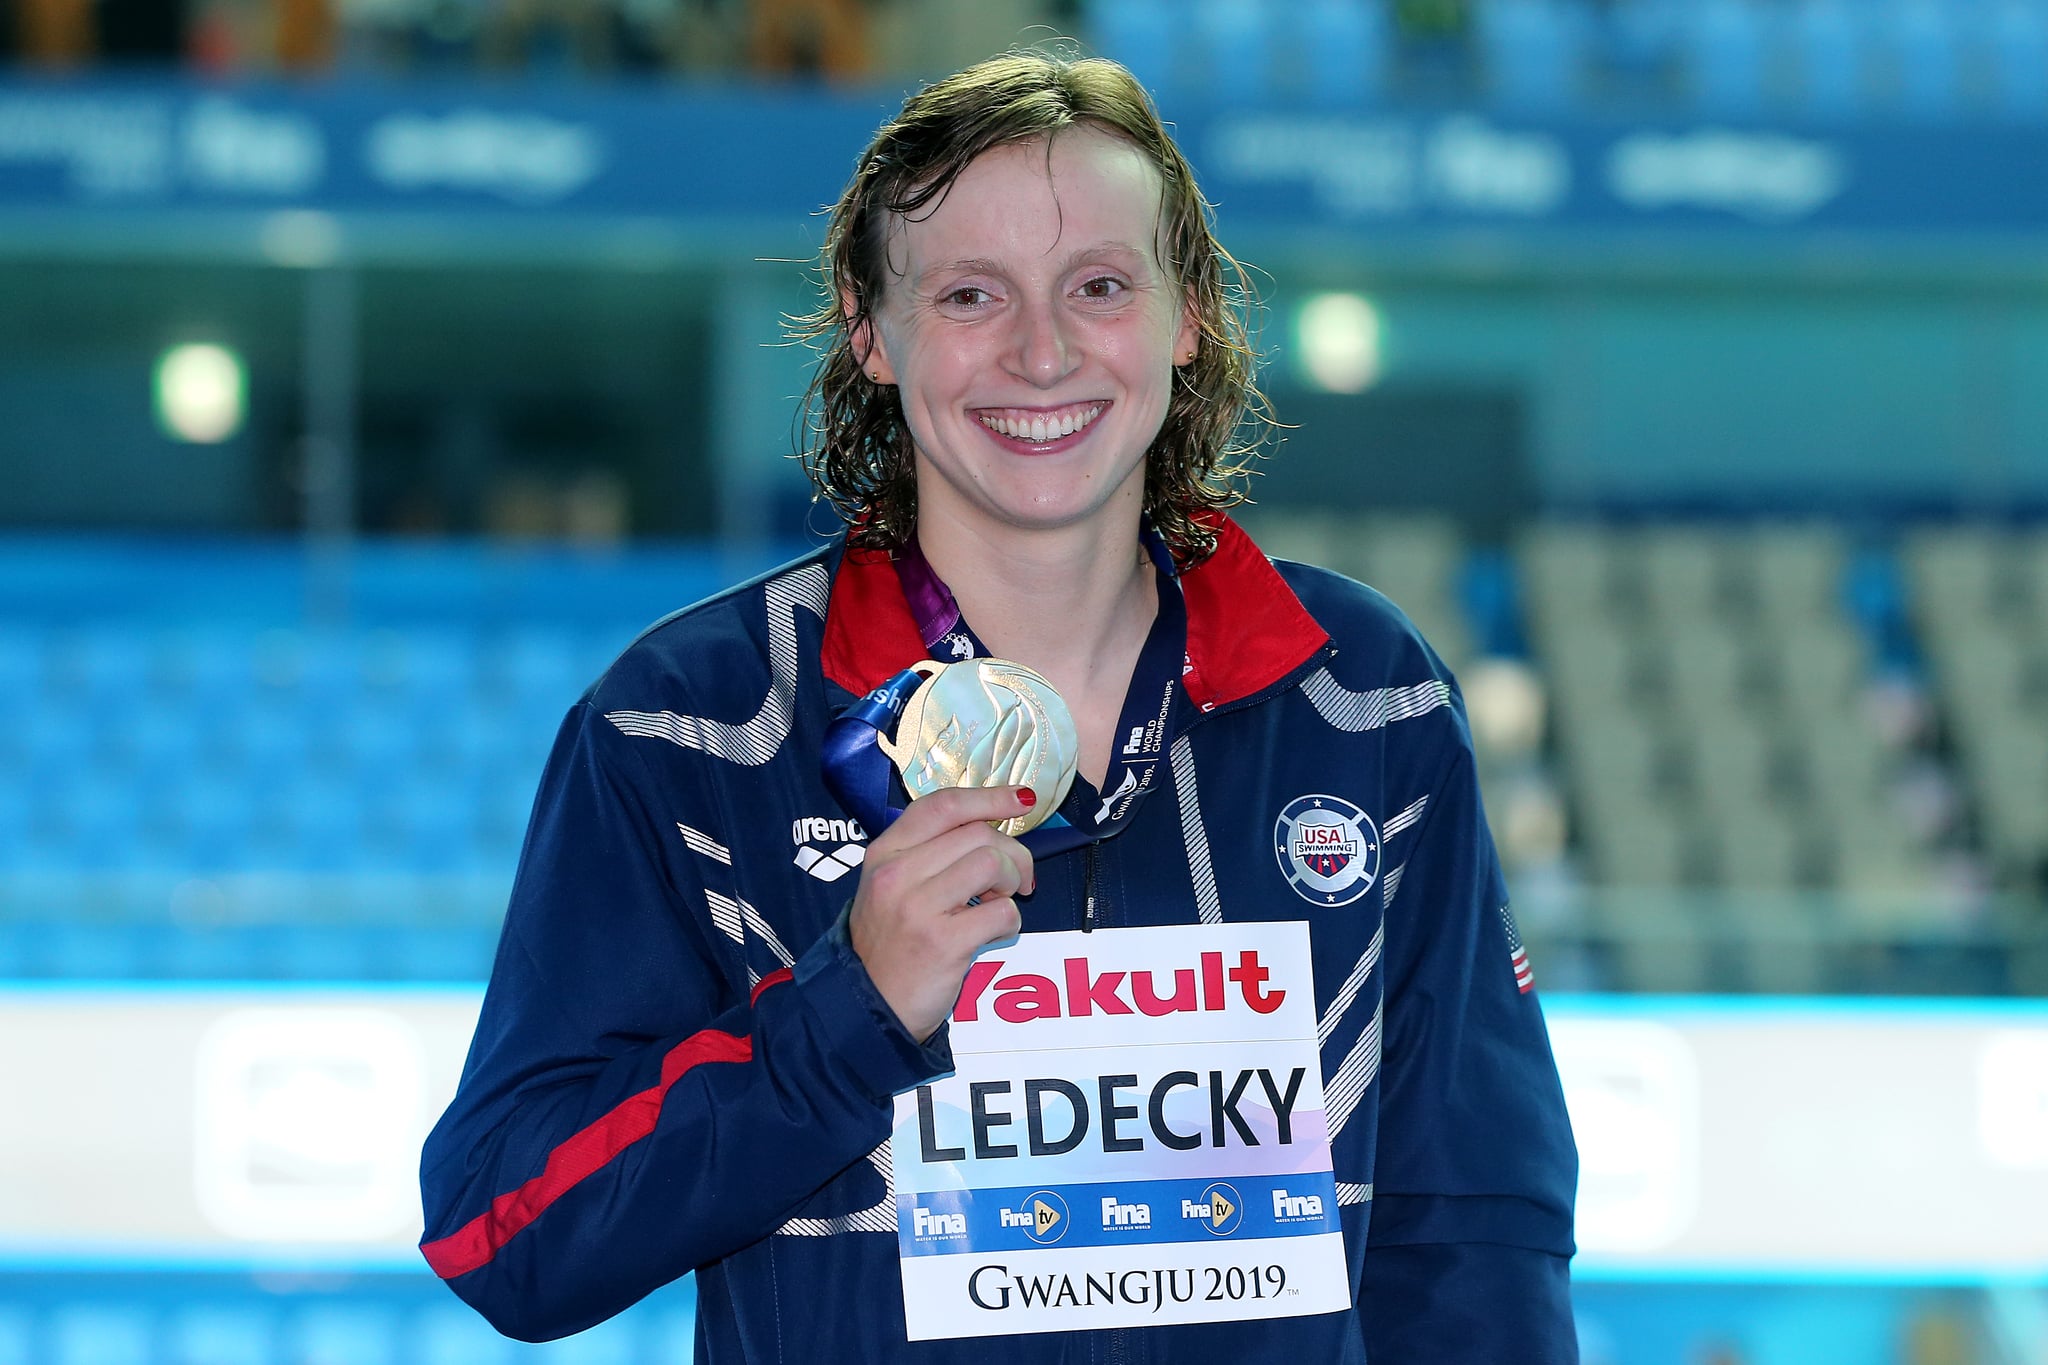 GWANGJU, SOUTH KOREA - JULY 27: Gold medalist Katie Ledecky of the United States poses during the medal ceremony for the Women's 800m Freestyle Final on day seven of the Gwangju 2019 FINA World Championships at Nambu International Aquatics Centre on July 27, 2019 in Gwangju, South Korea. (Photo by Maddie Meyer/Getty Images)